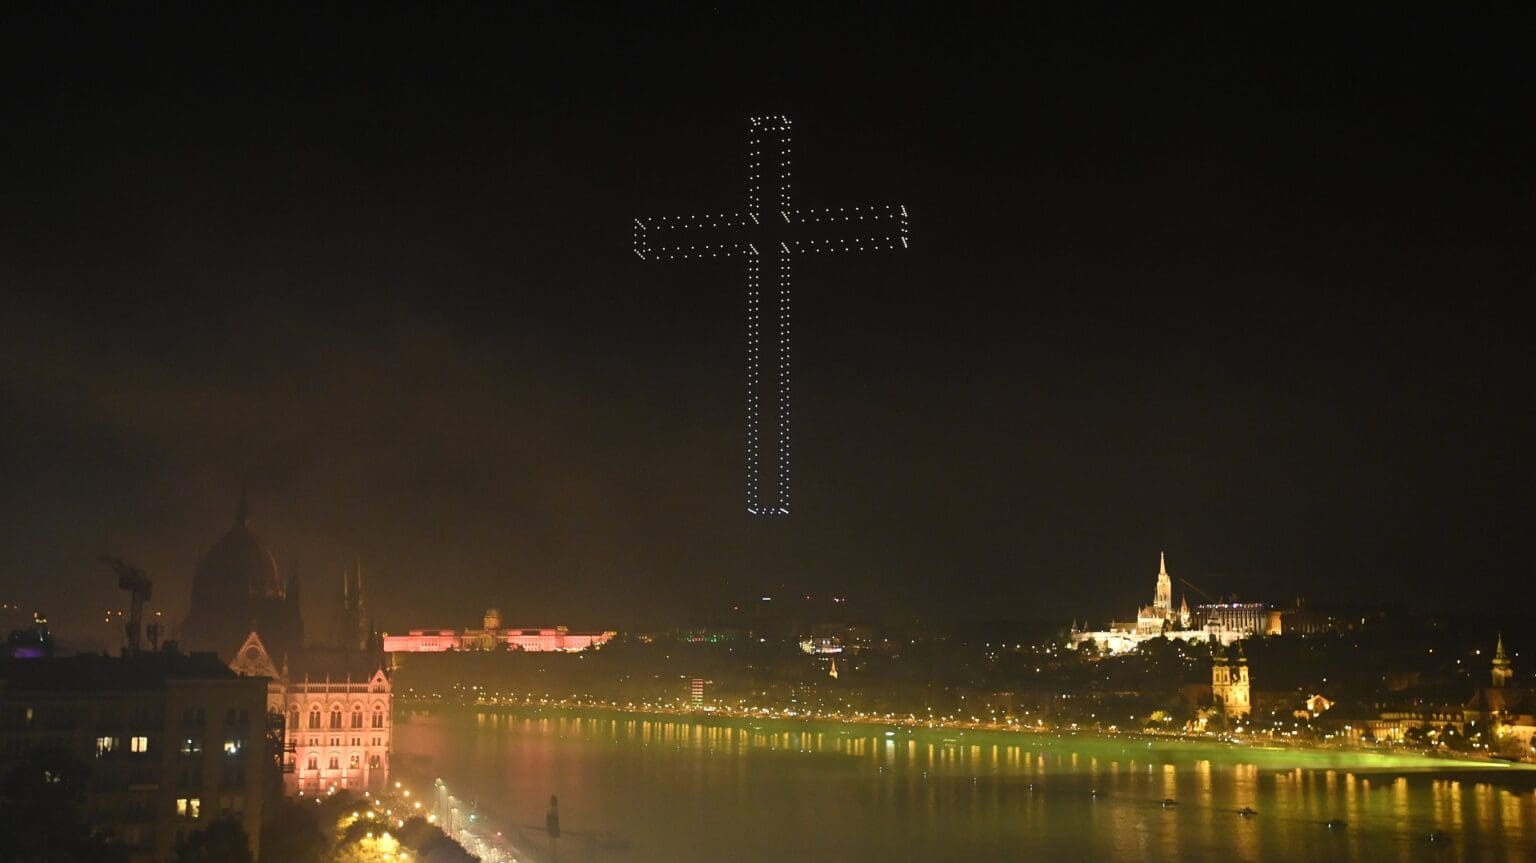 Cross Displayed At St Stephen’s Day Fireworks Lauded Internationally on Social Media